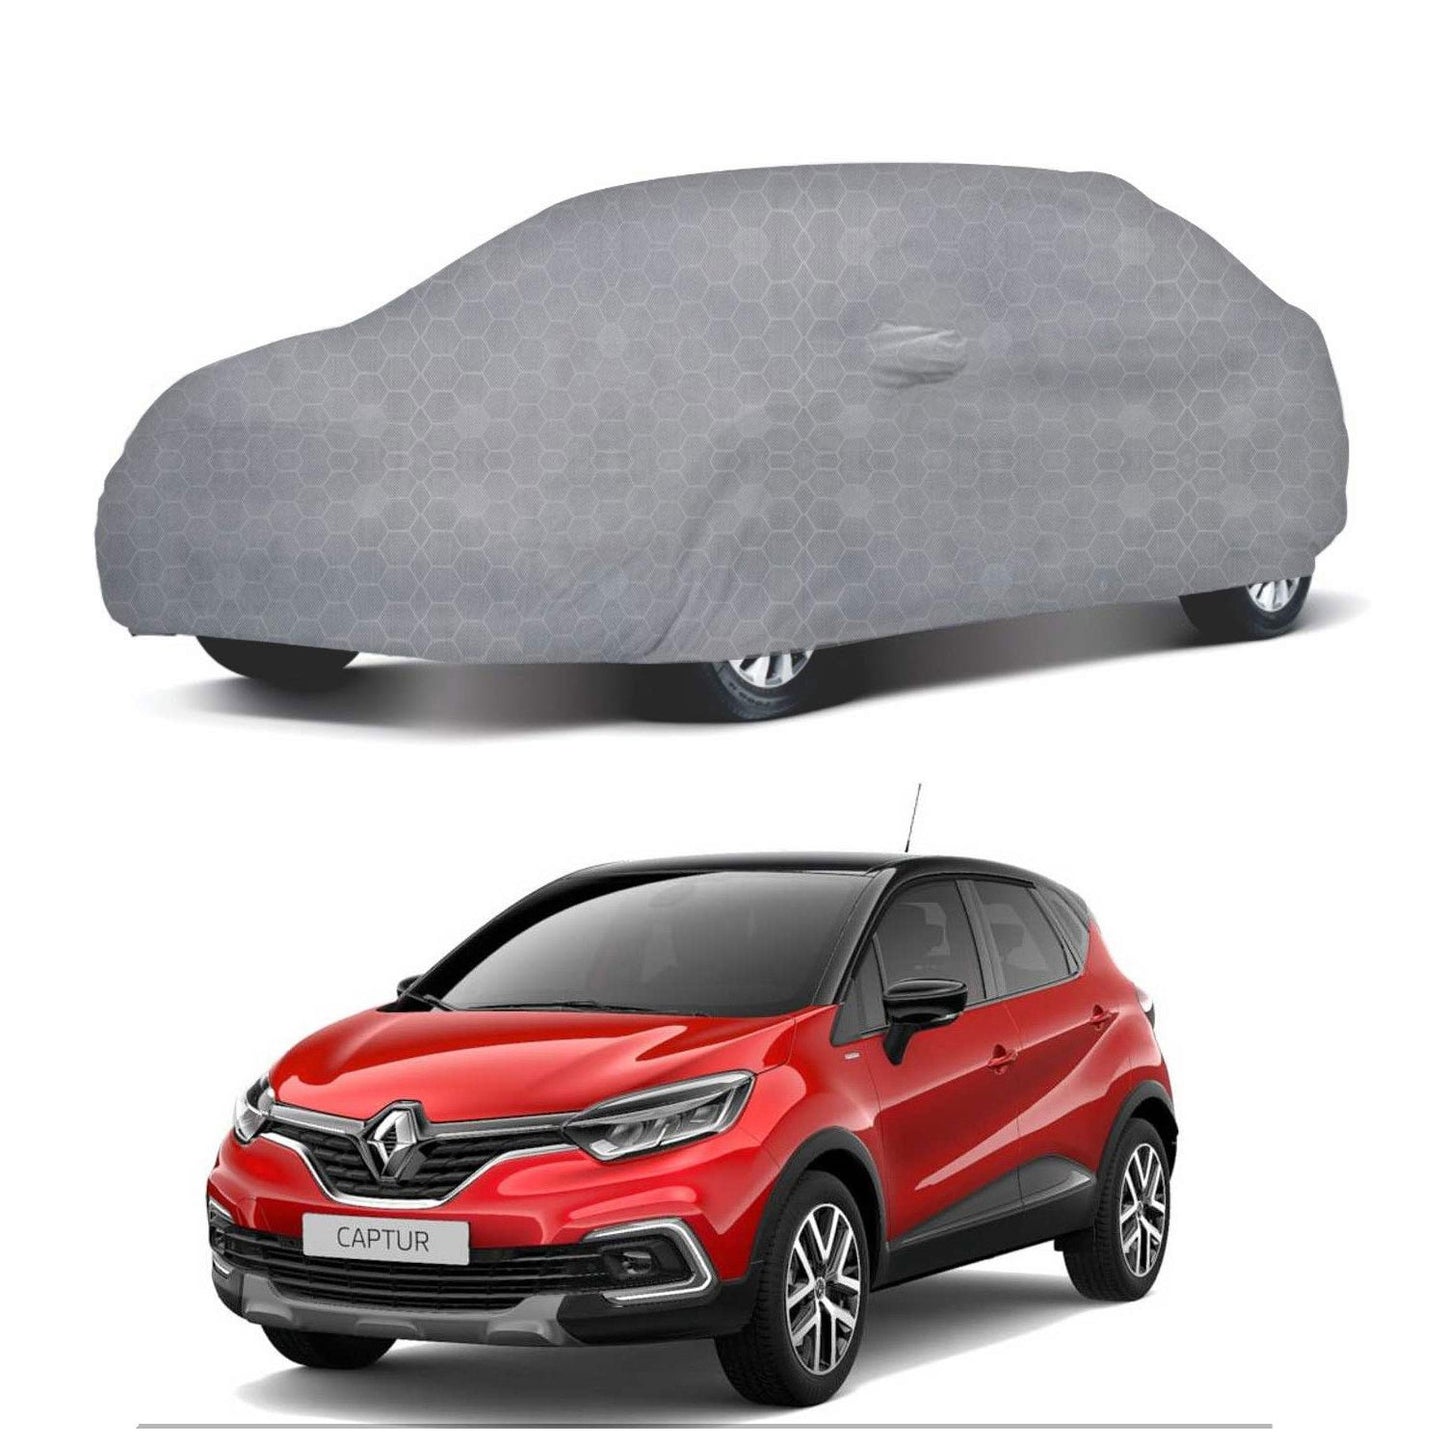 Oshotto 100% Dust Proof, Water Resistant Grey Car Body Cover with Mirror Pocket For Renault Captur